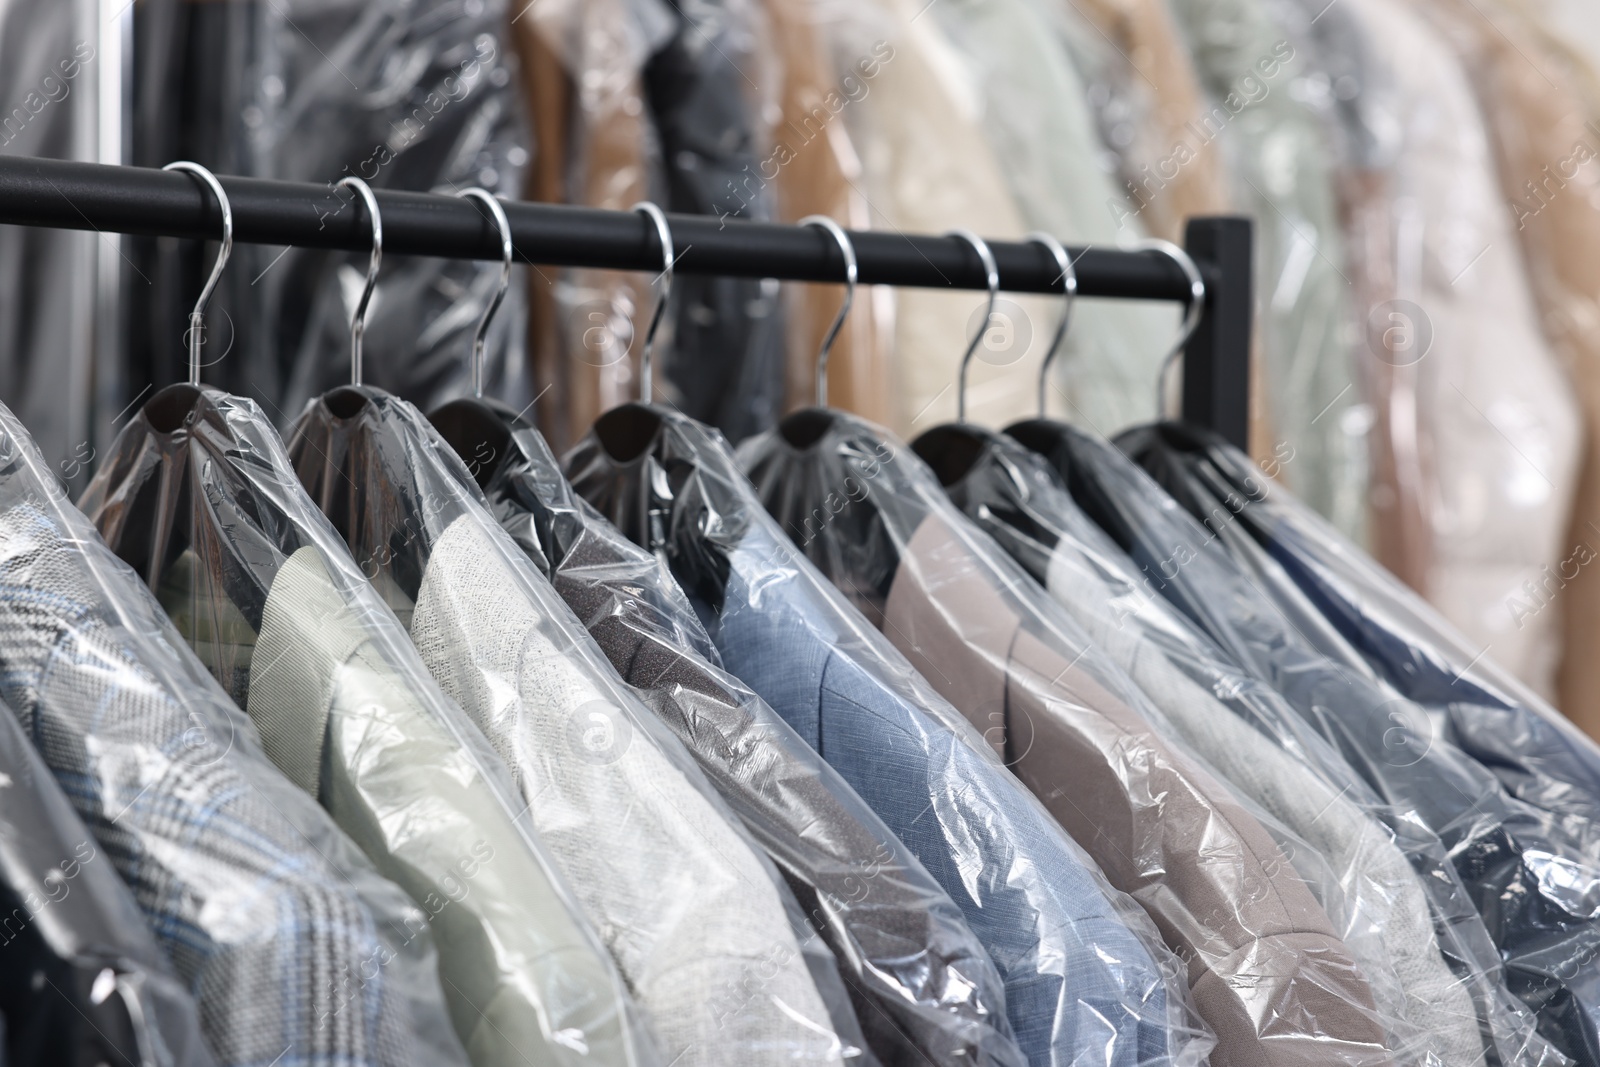 Photo of Dry-cleaning service. Many different clothes in plastic bags hanging on rack indoors, closeup